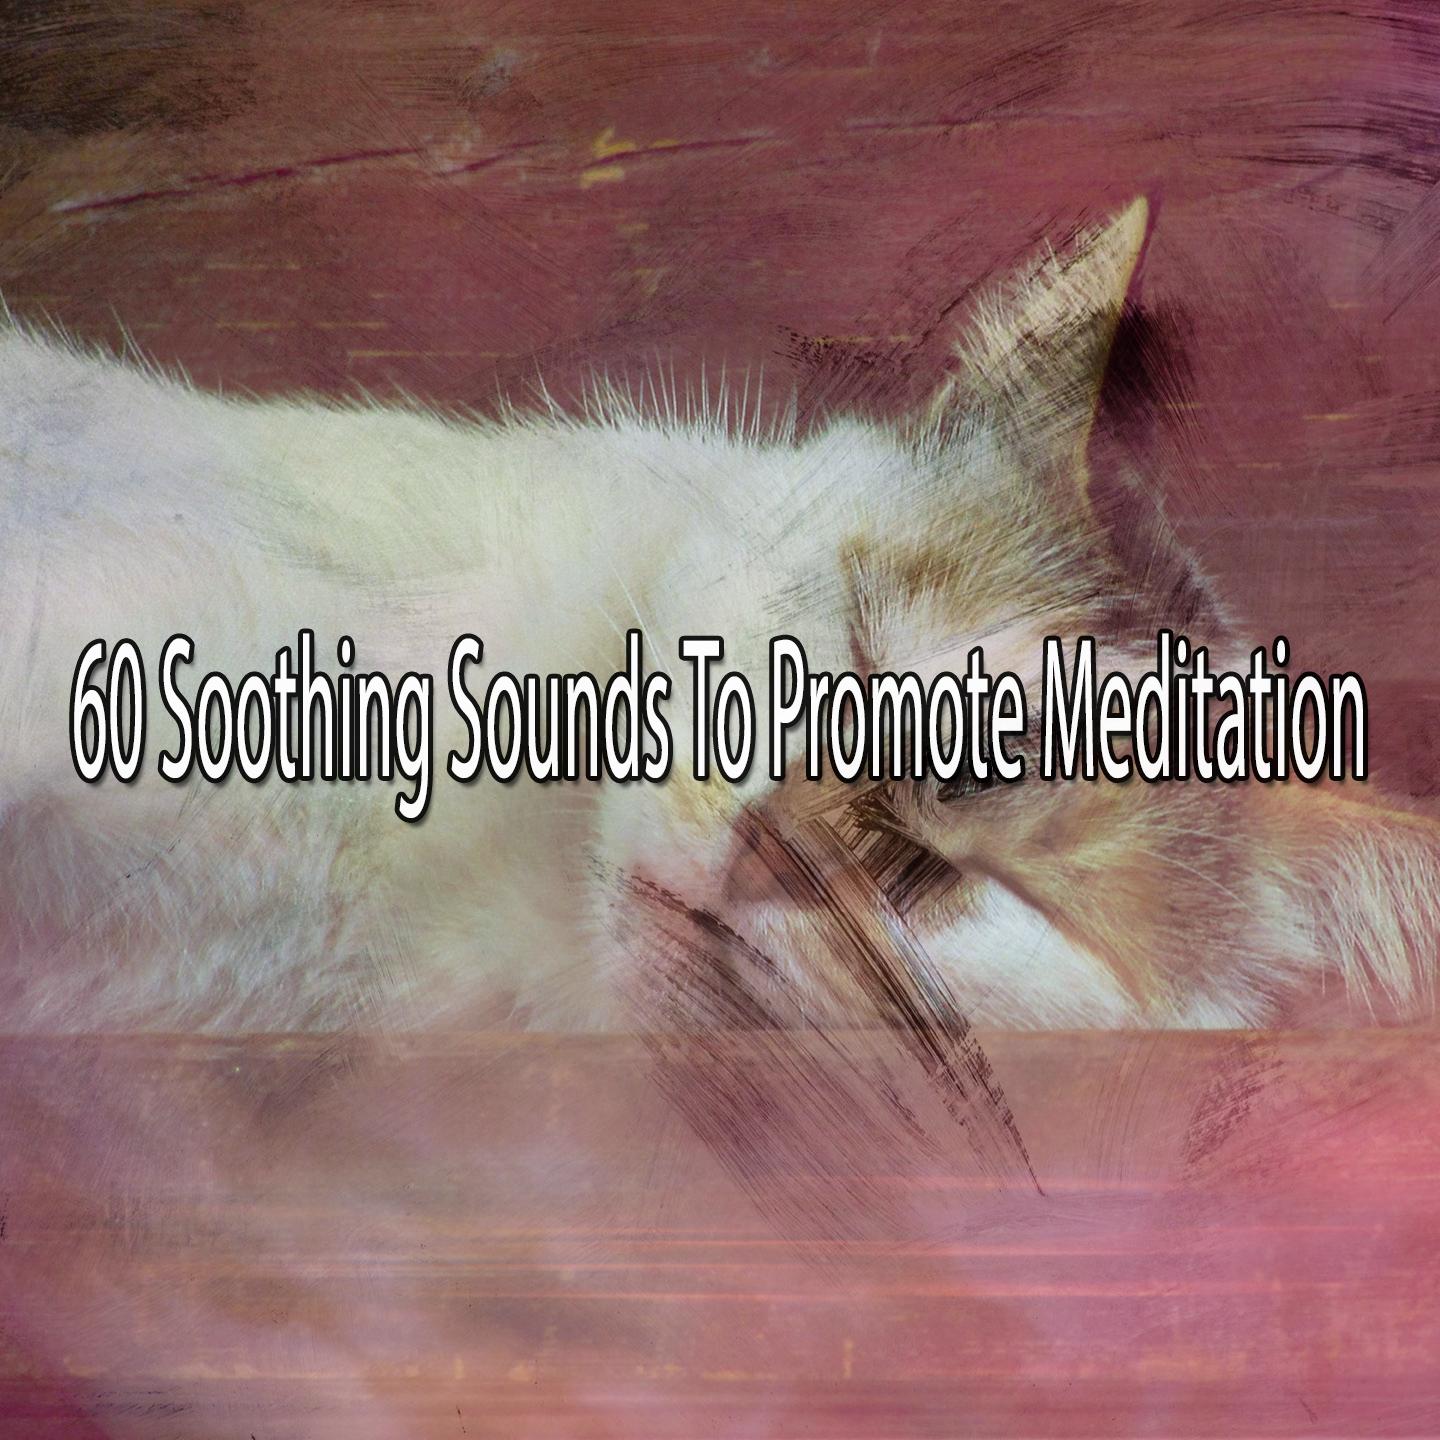 60 Soothing Sounds to Promote Meditation